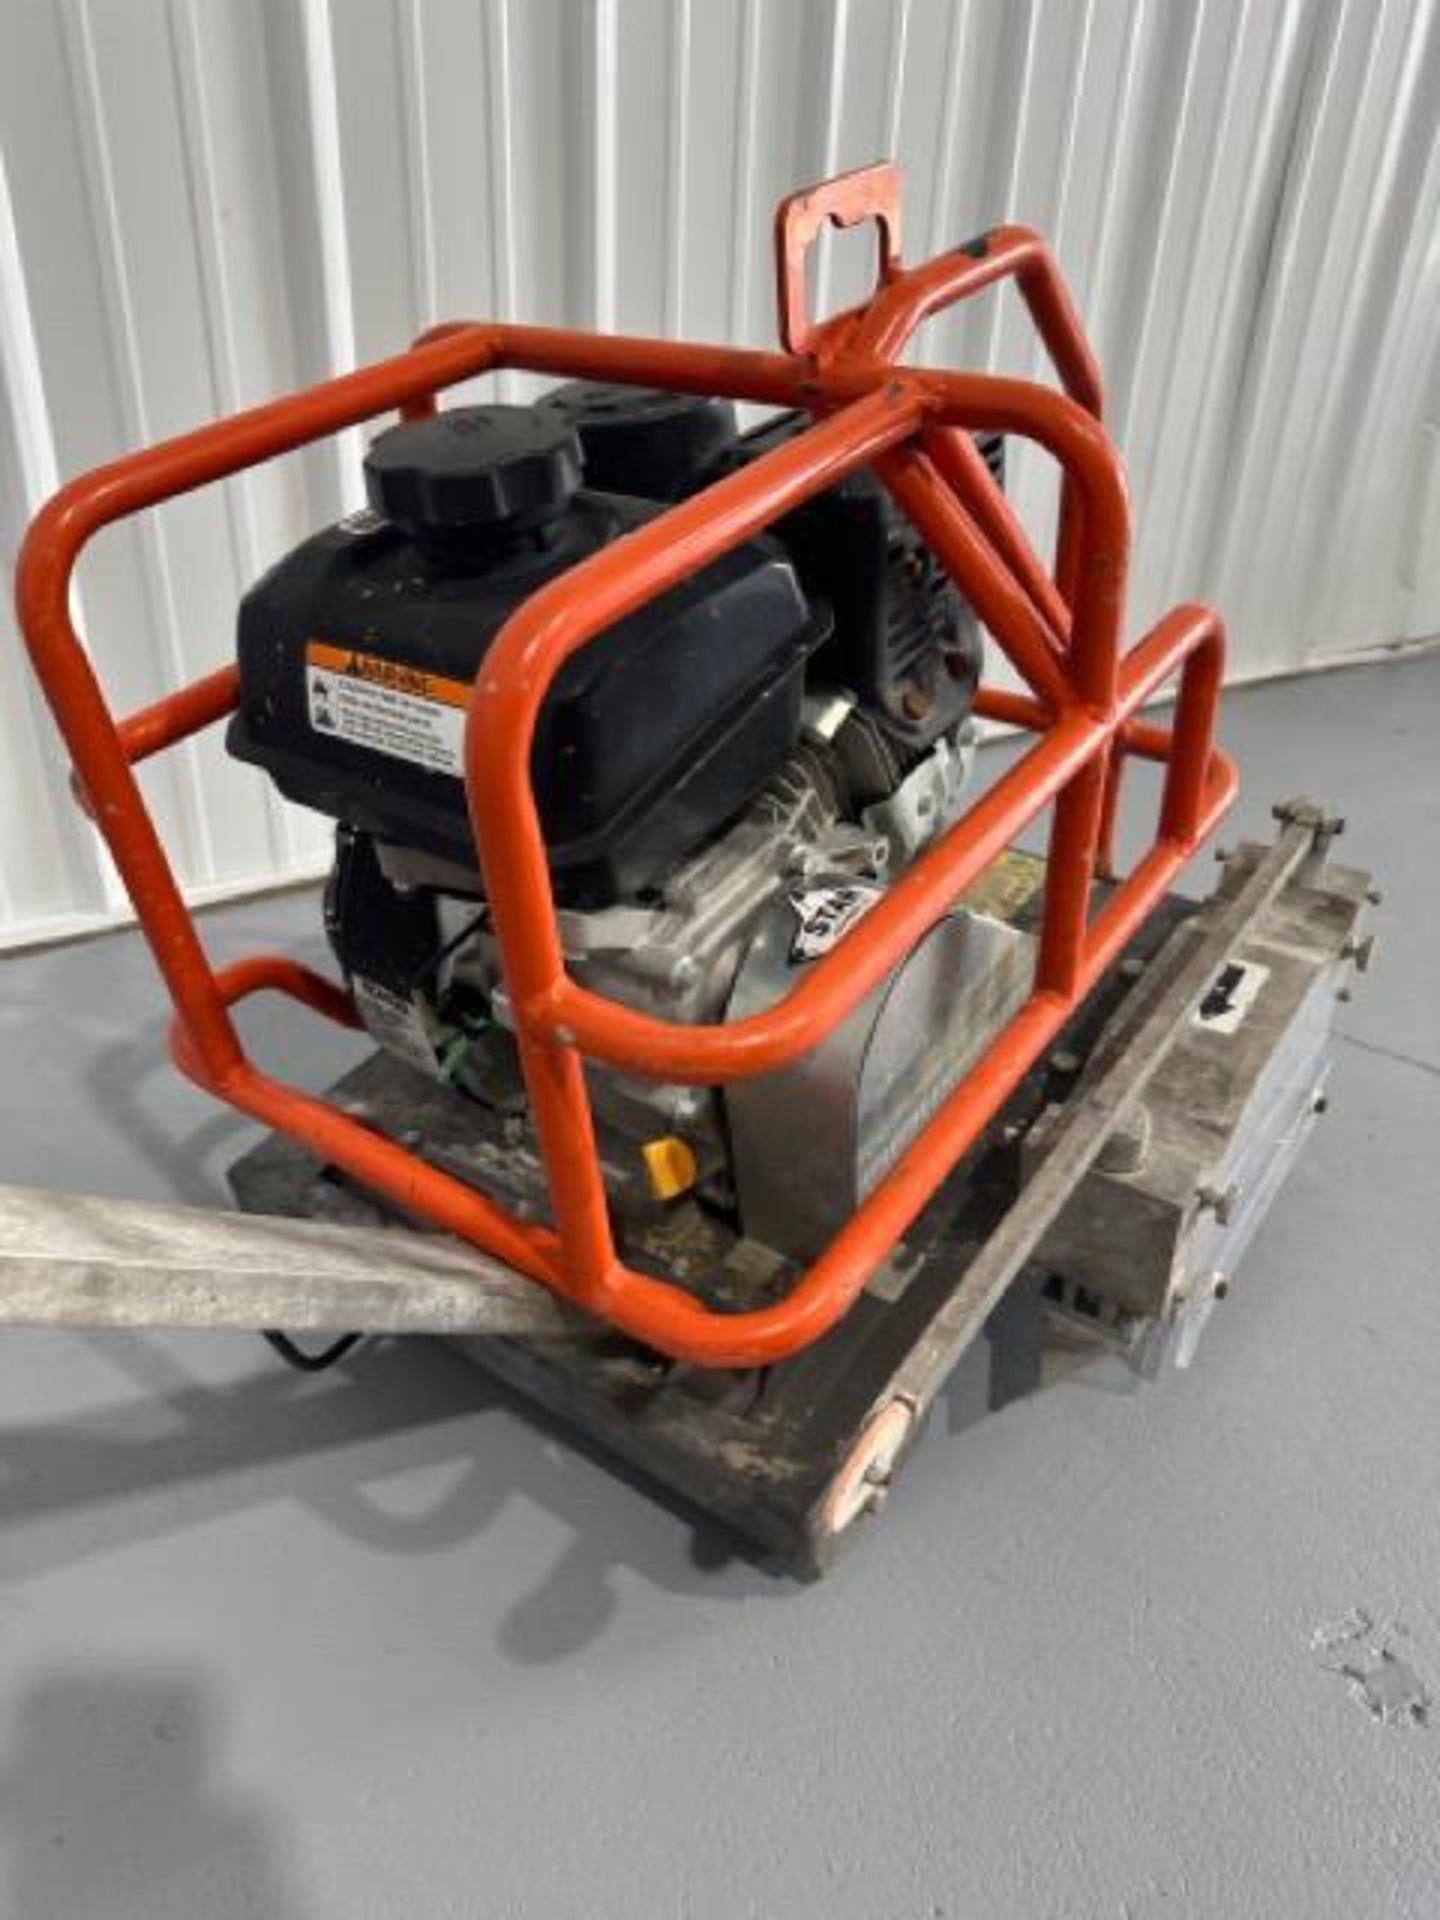 Husqvarna Soff-Cut 150 6" early entry concrete saw with Kohler Command Pro 5.5hp gas engine - Image 5 of 6